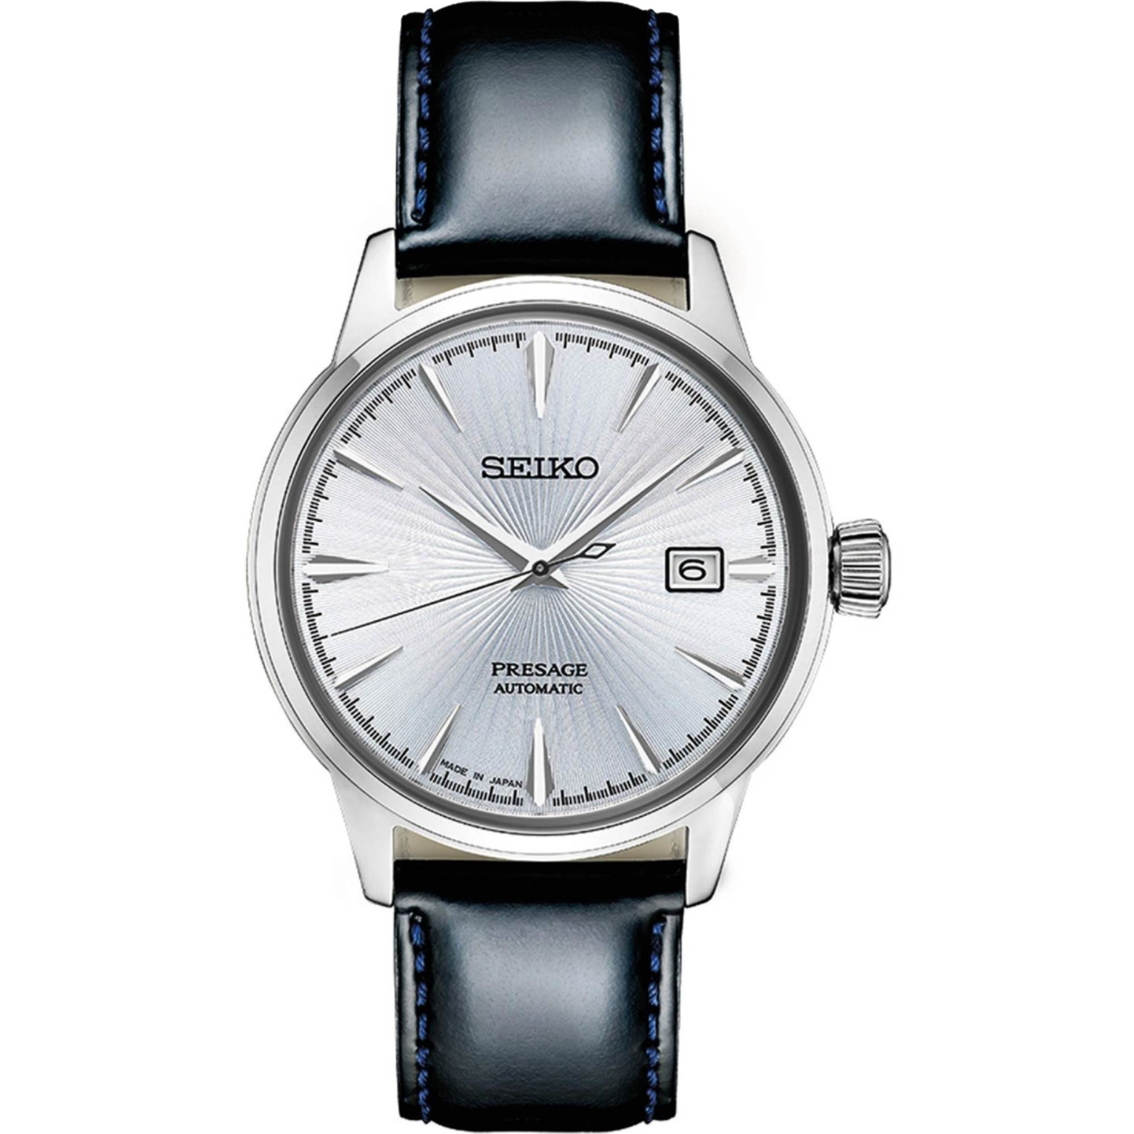 Seiko Men's Presage Stainless Steel Watch Srpb43 | Leather Band ...